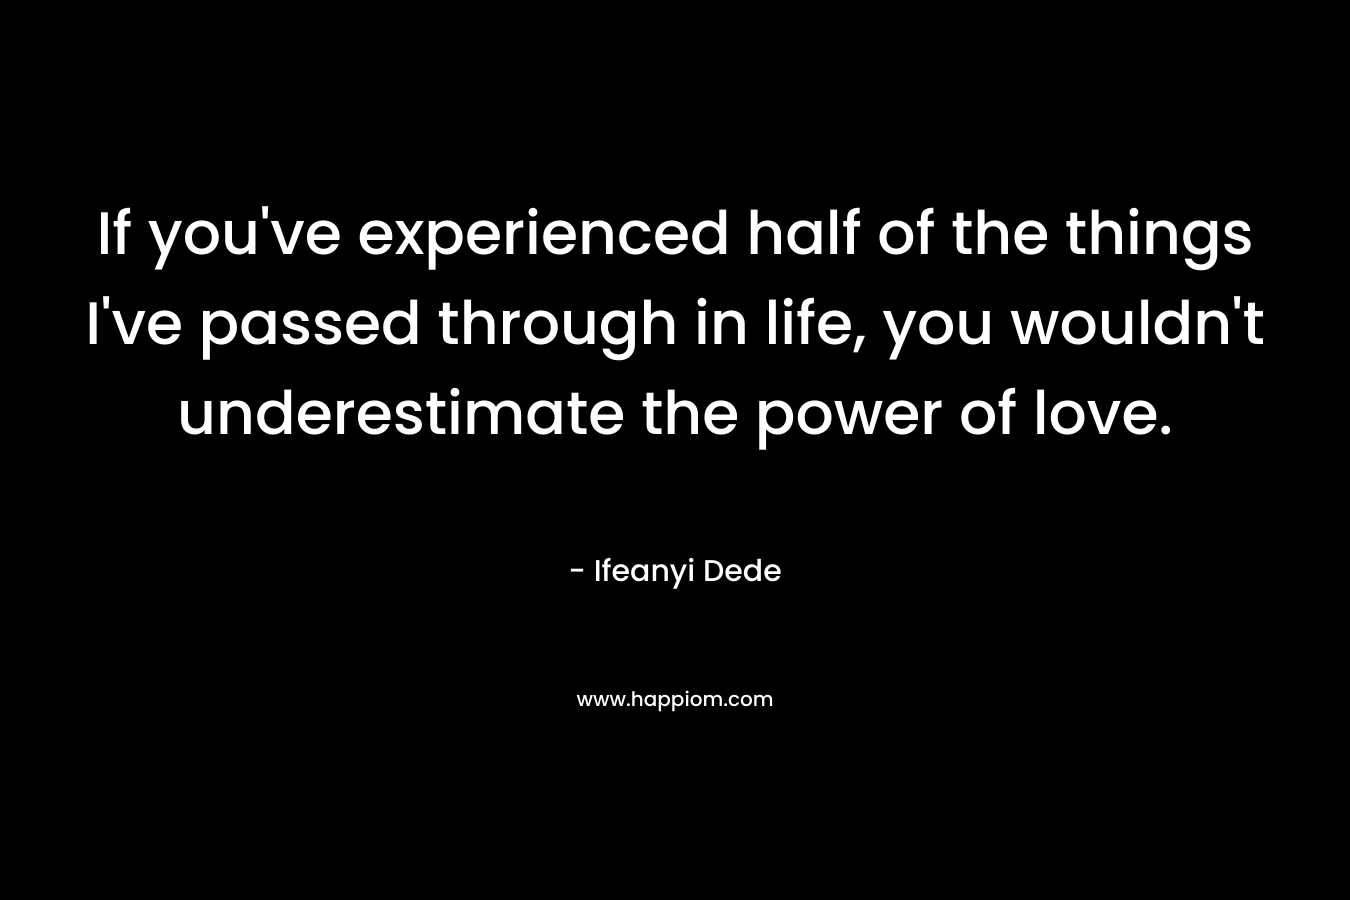 If you've experienced half of the things I've passed through in life, you wouldn't underestimate the power of love.